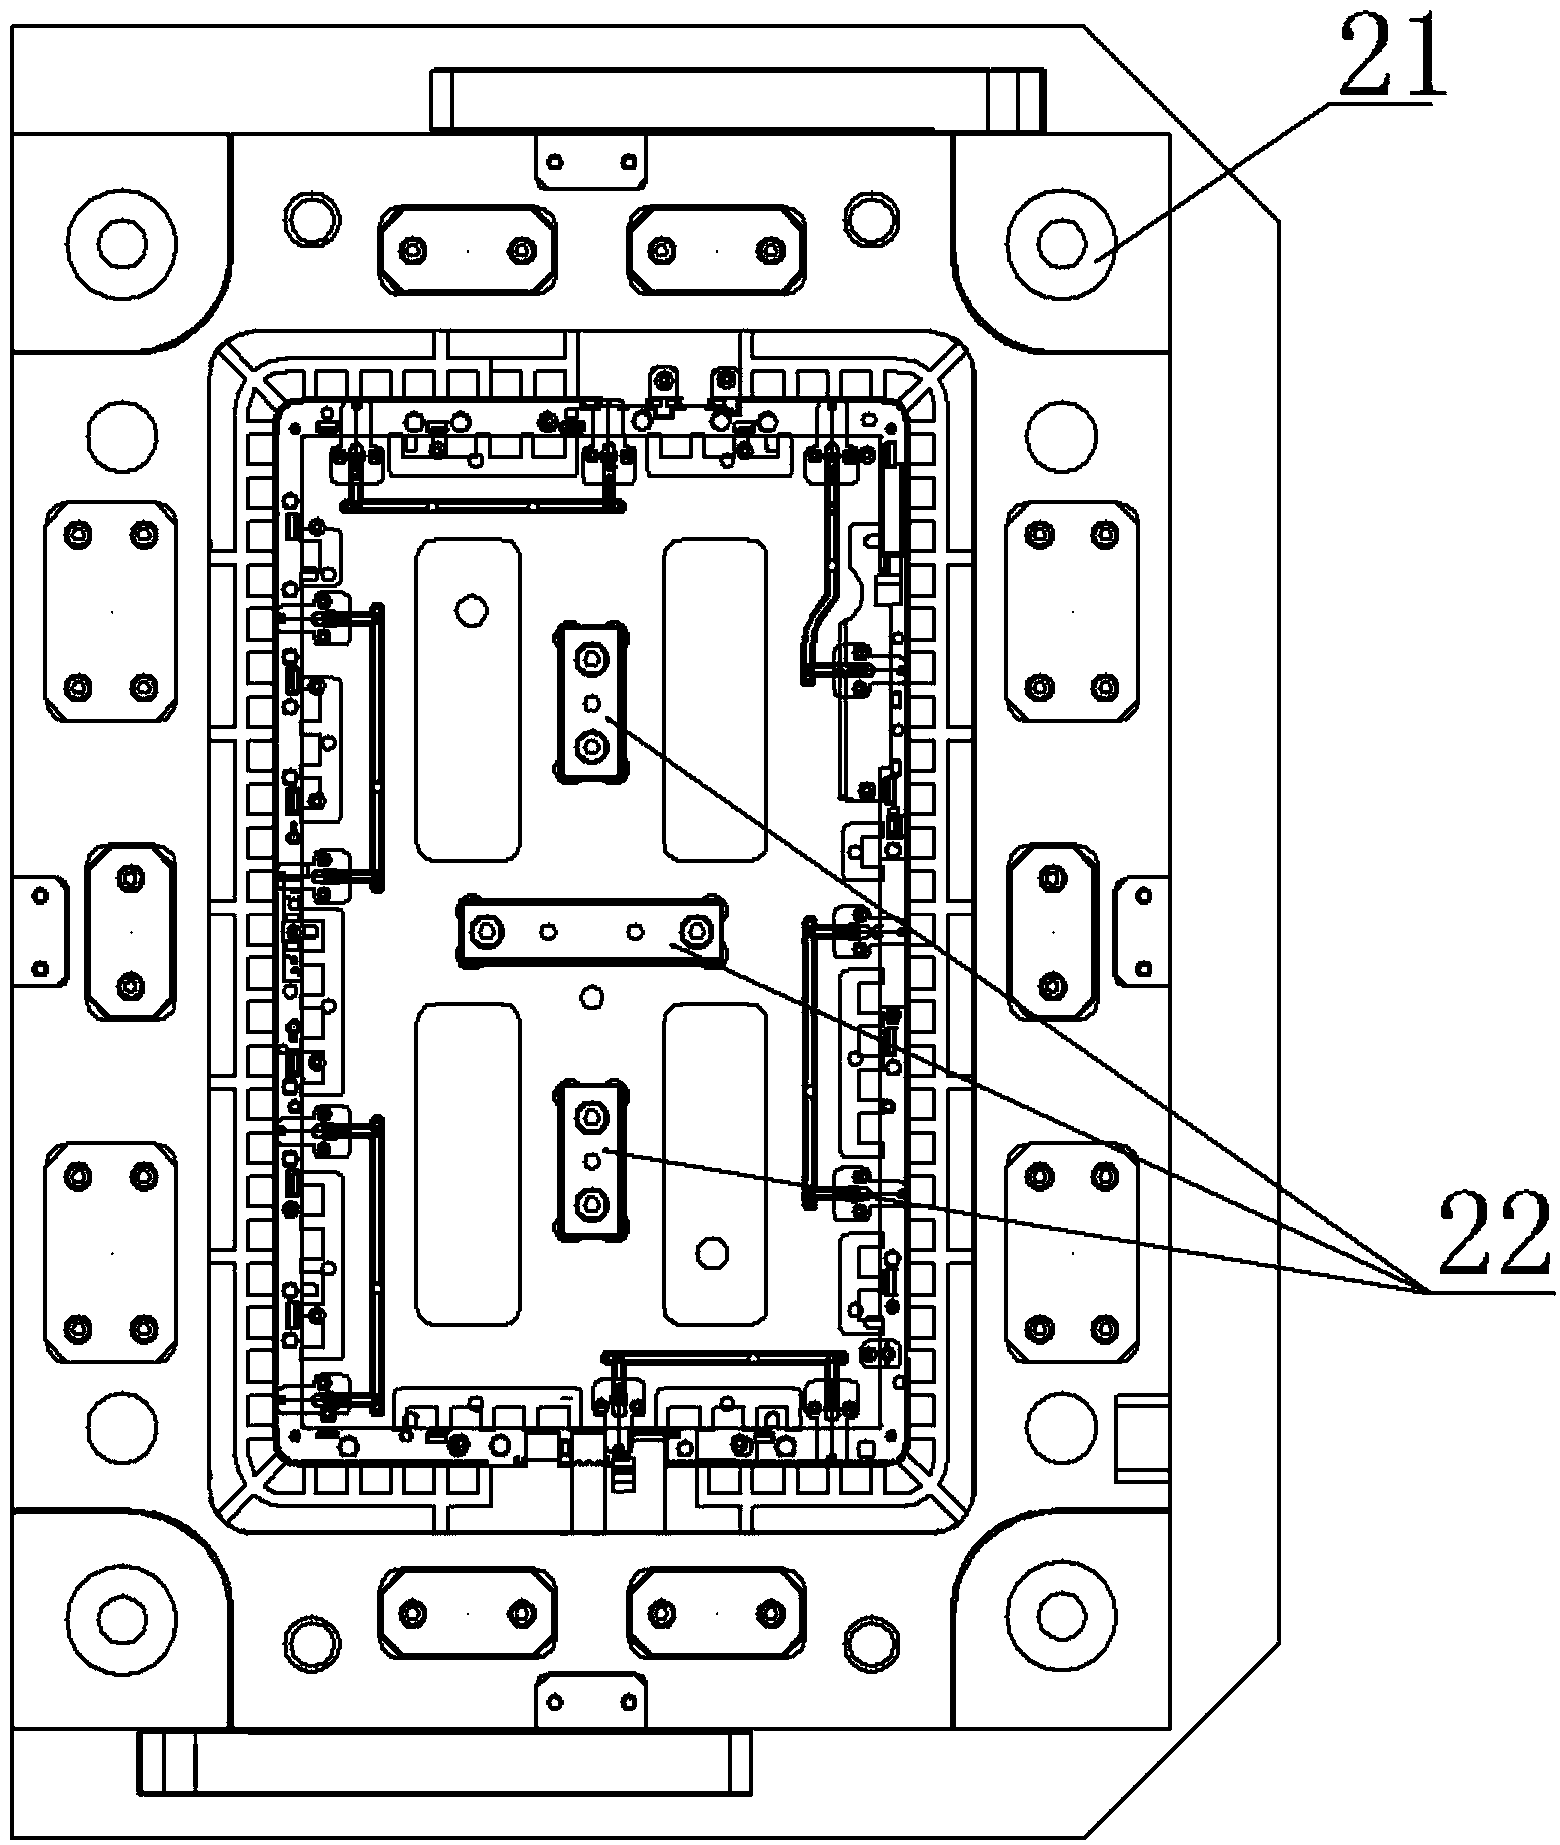 Double color injection mold for front frame of computer